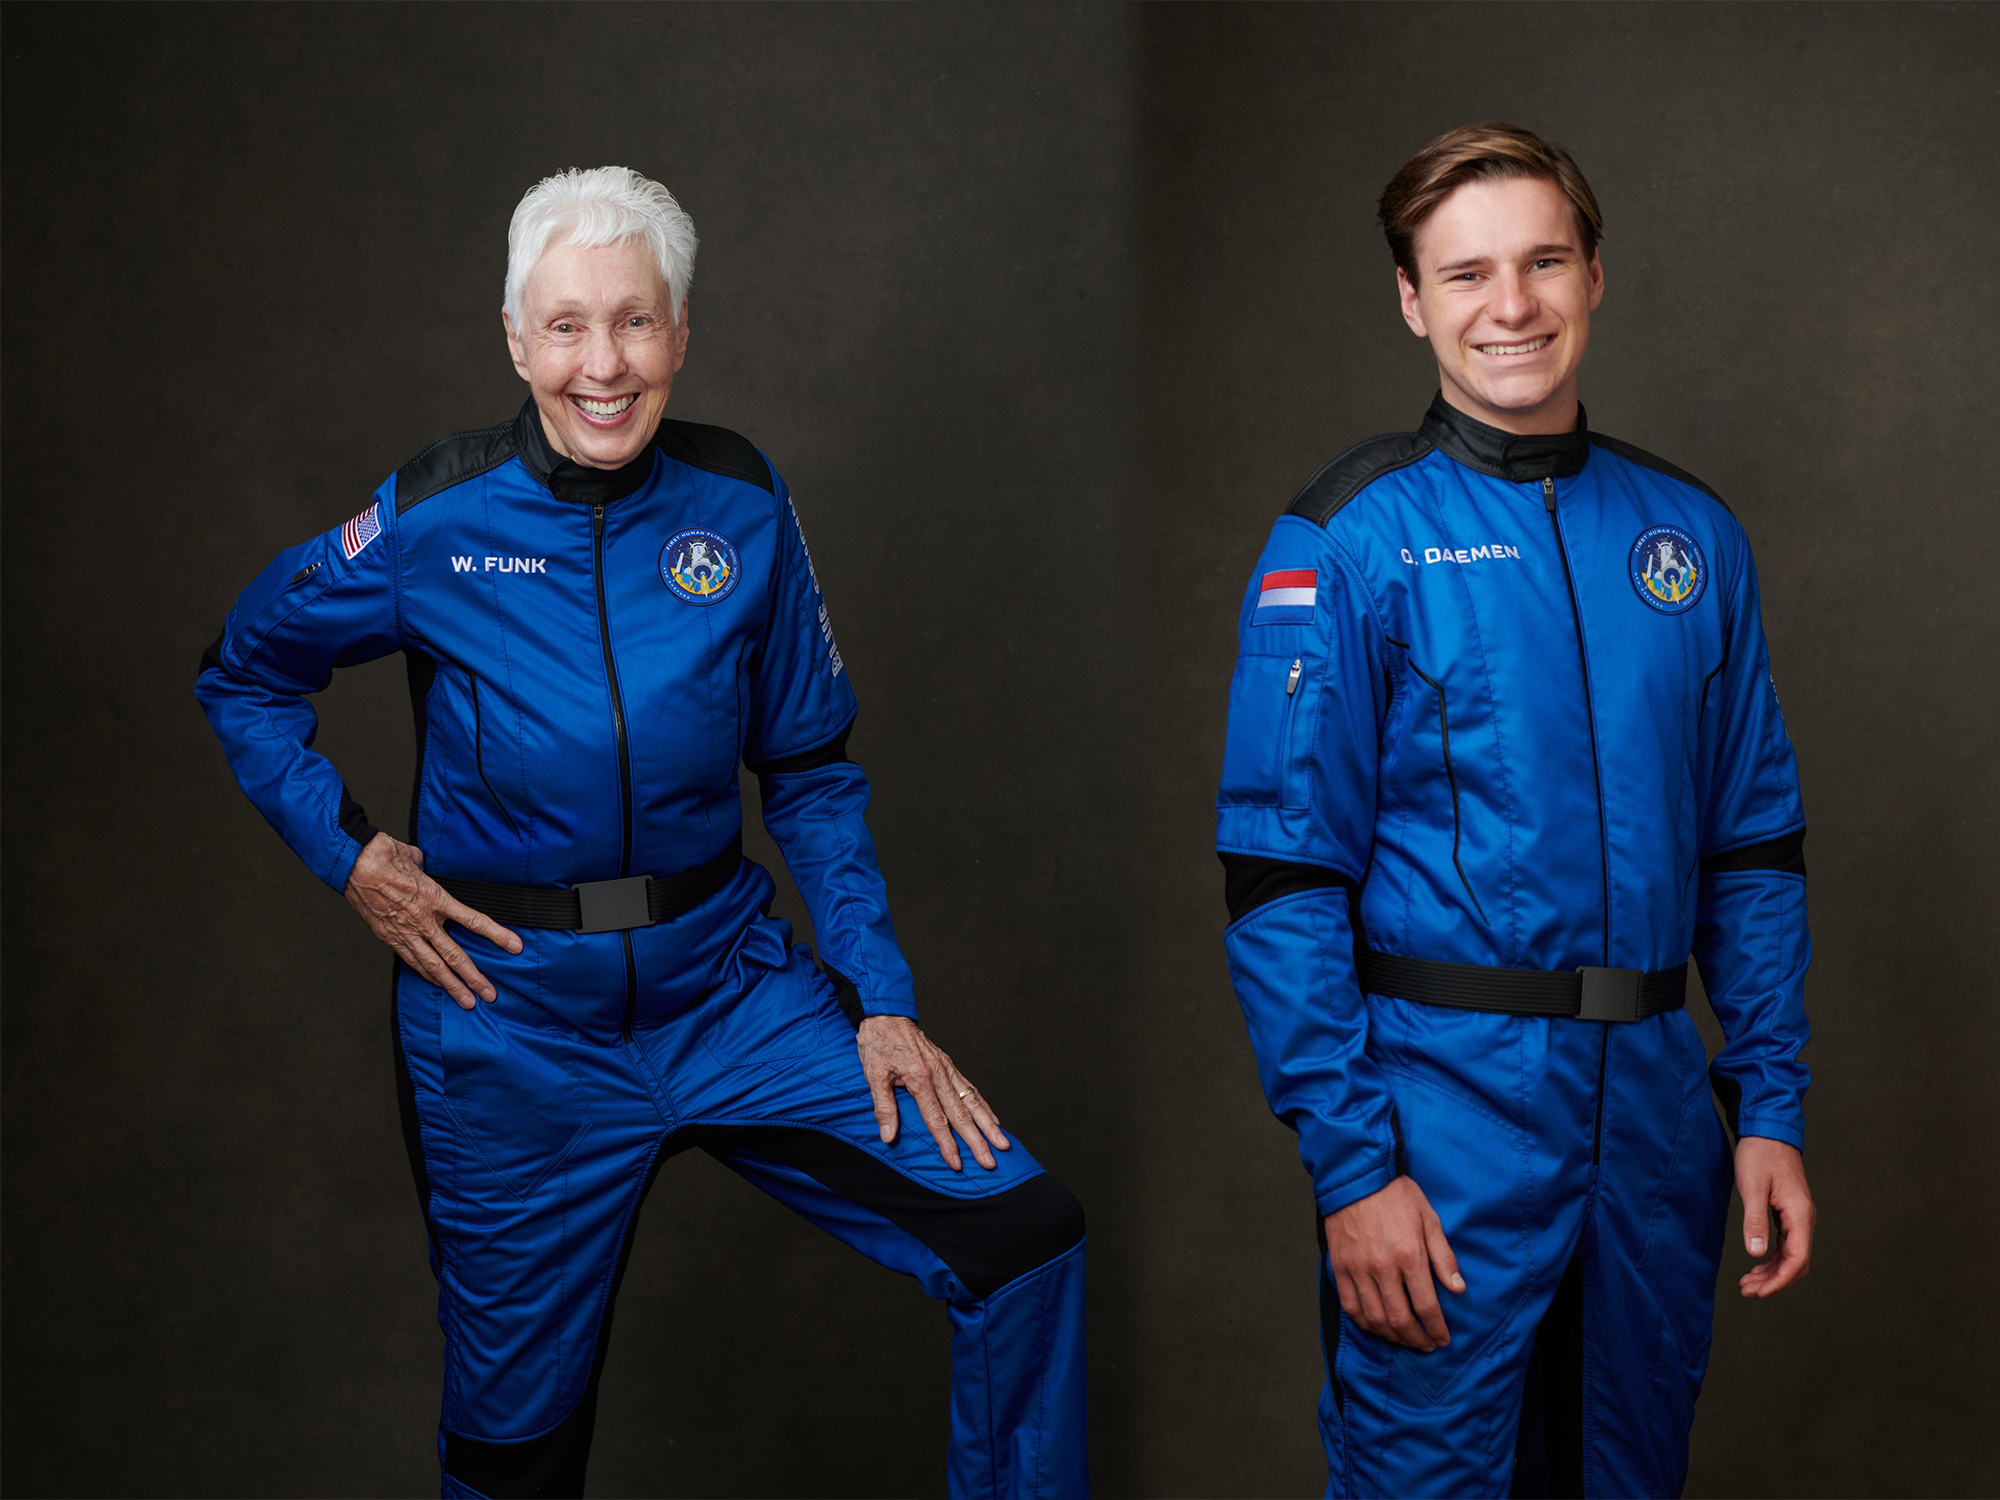 Blue Origin flies the Oldest person (Wally Funk) and the Youngest person (Oliver Daemen) to space.